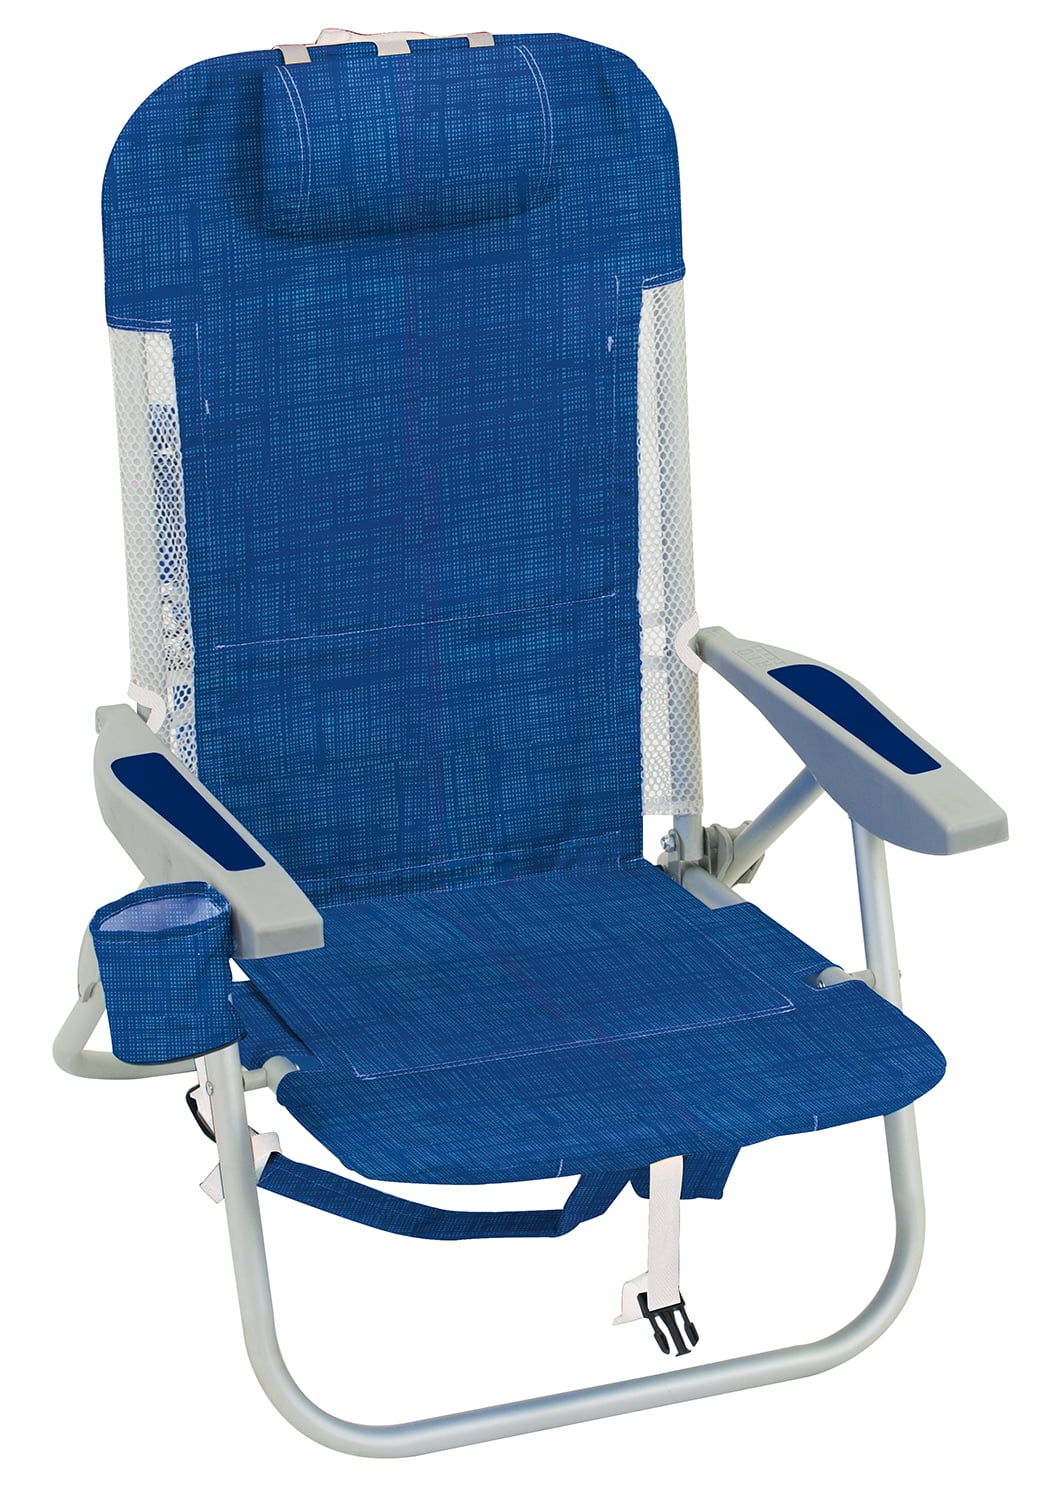 Creatice Beach Chair With Cooler for Living room